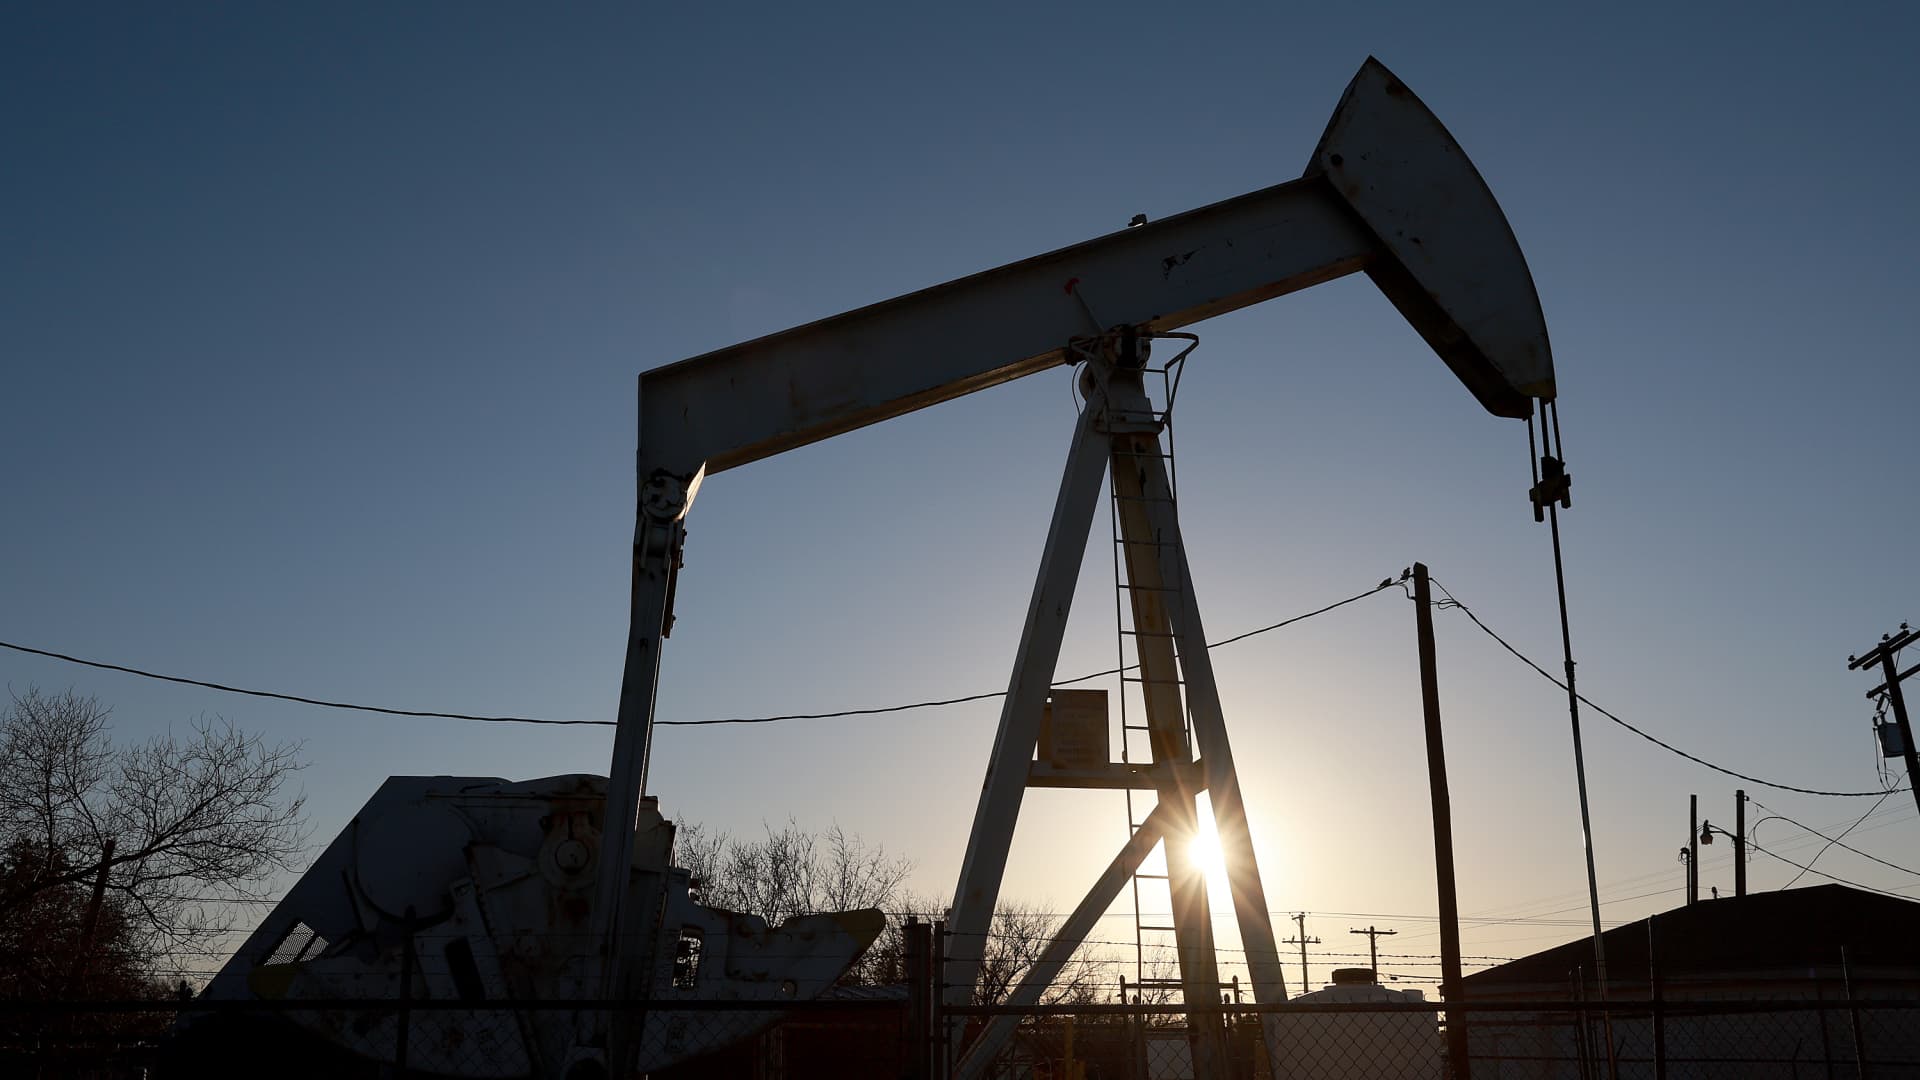 We're making a small contrarian buy as oil prices and energy stocks get crushed